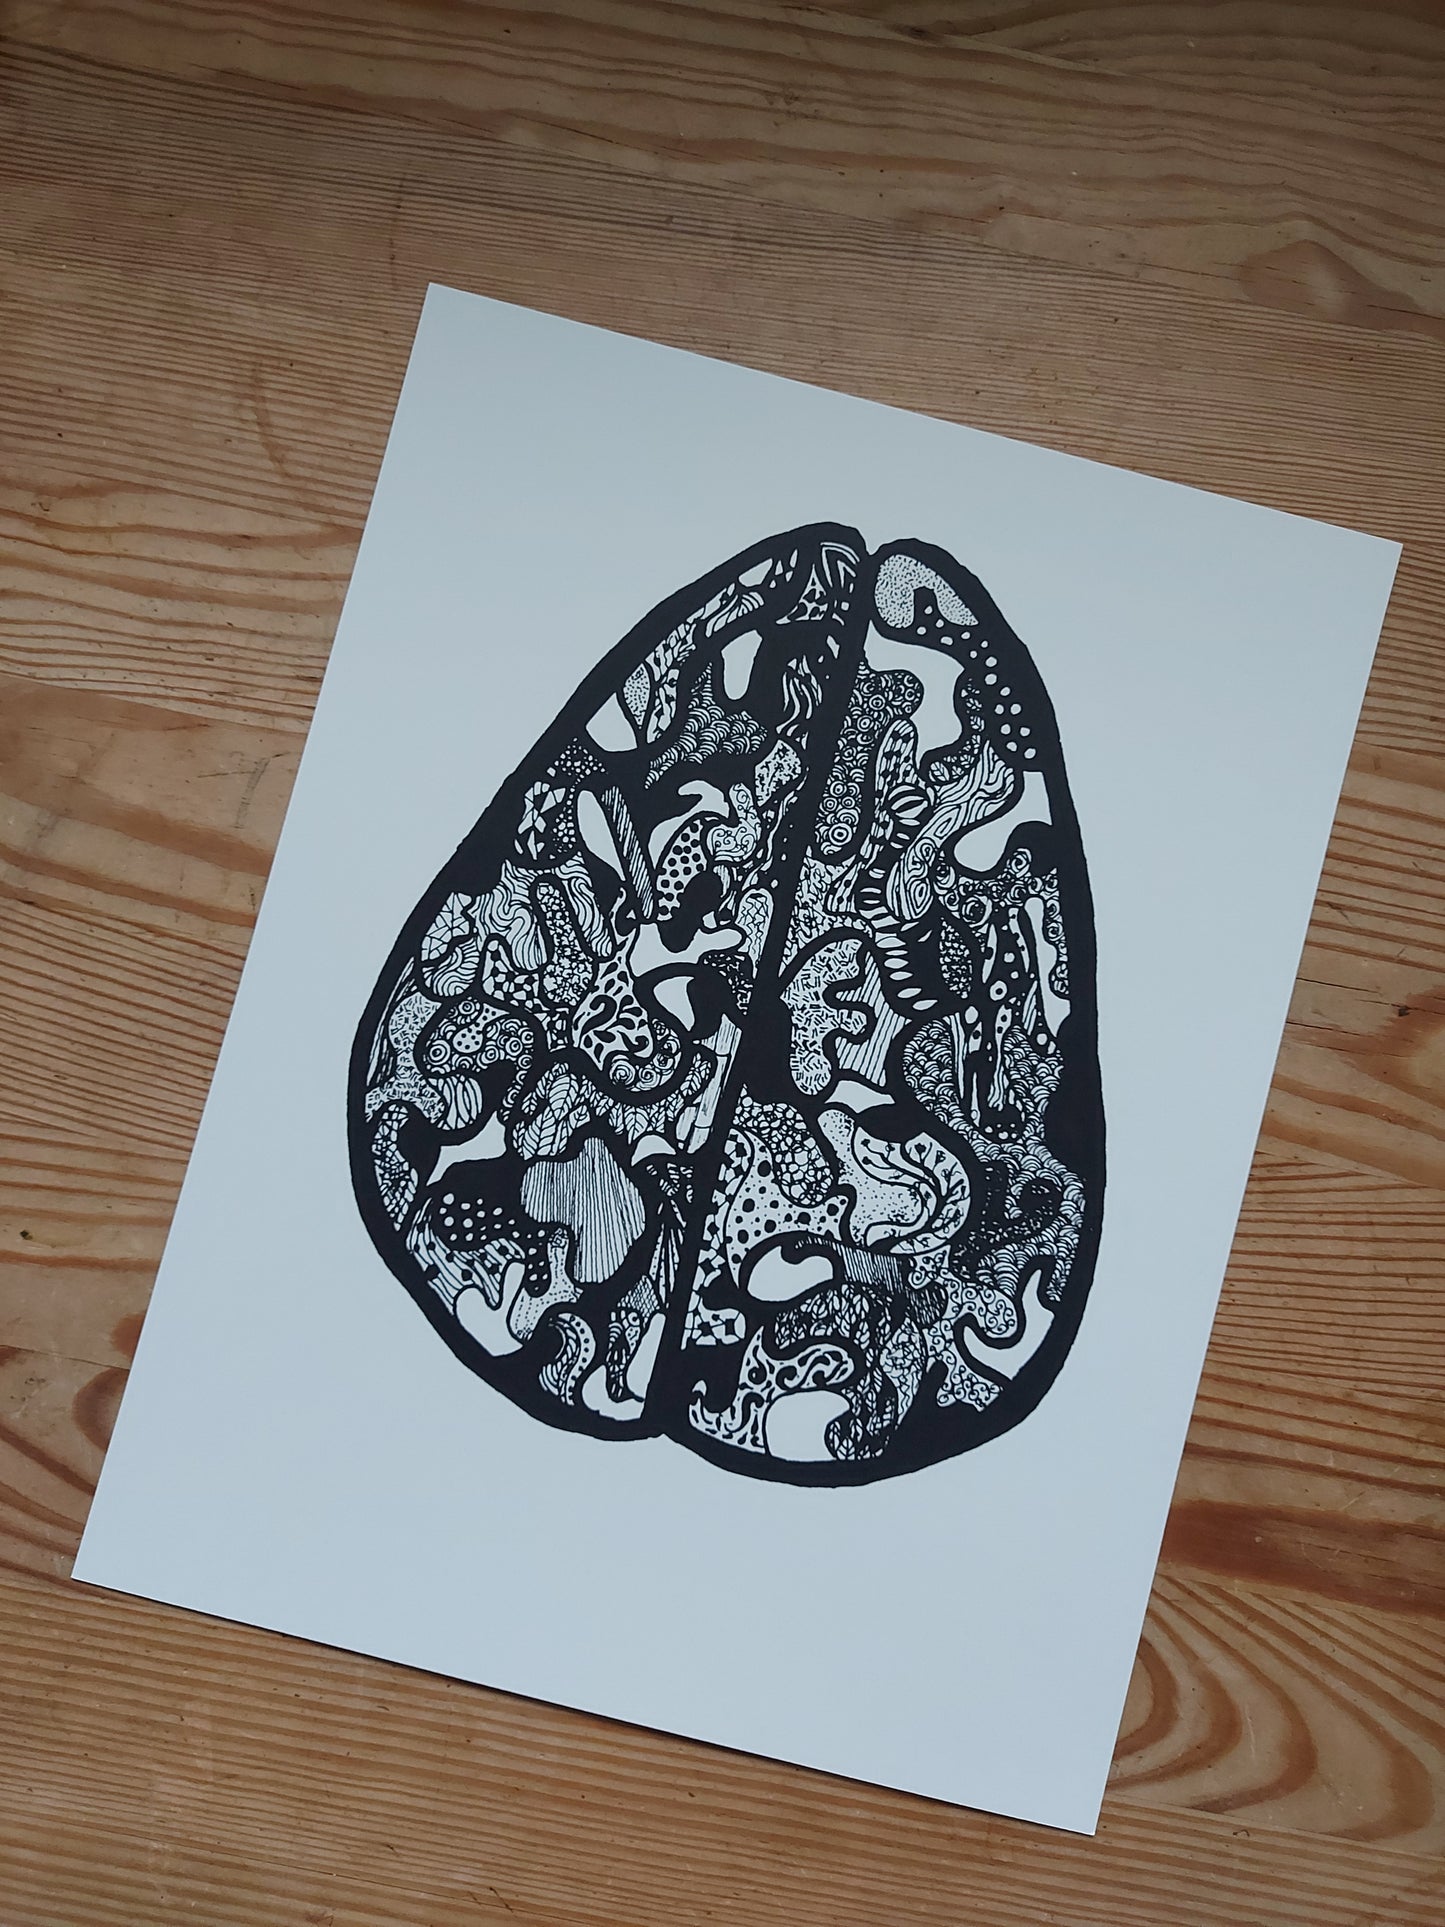 The Mind, The Brain - Limited Anatomical Print by Connally Goods